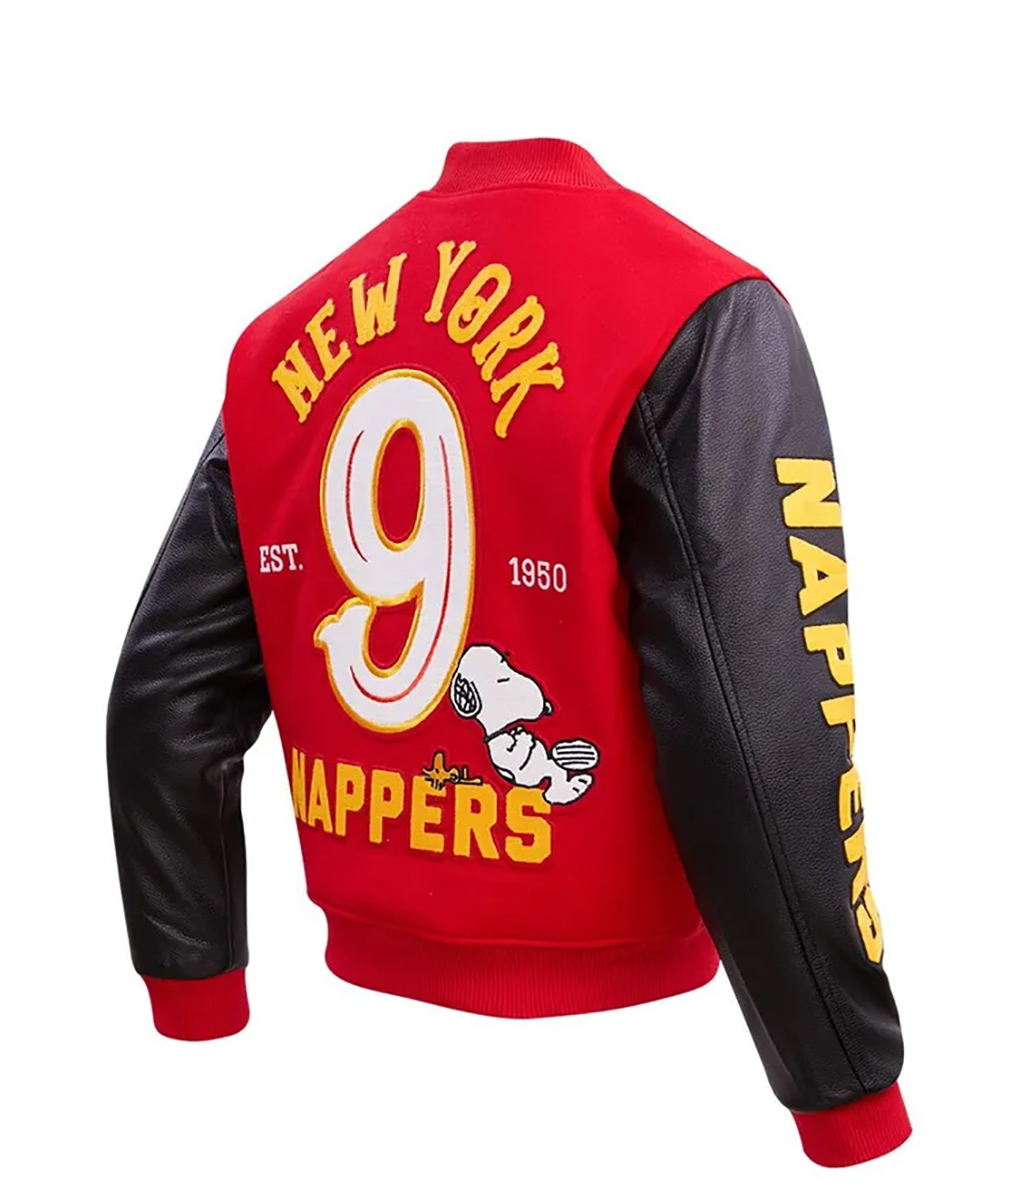 Snoopy New York Nappers Red Varsity Jacket (3)